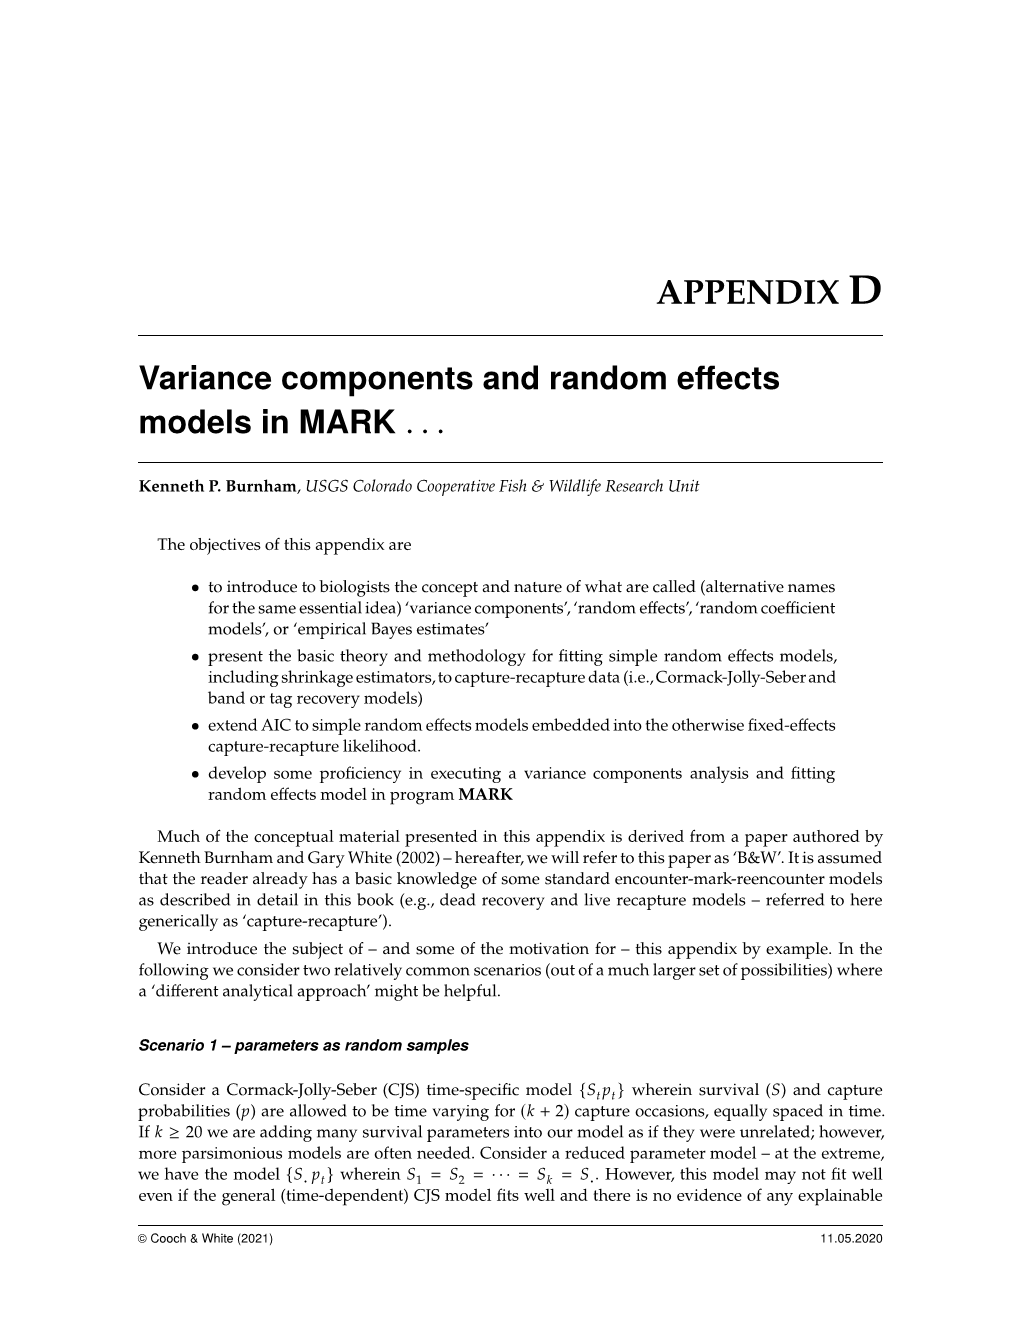 Variance Components + Random Effects